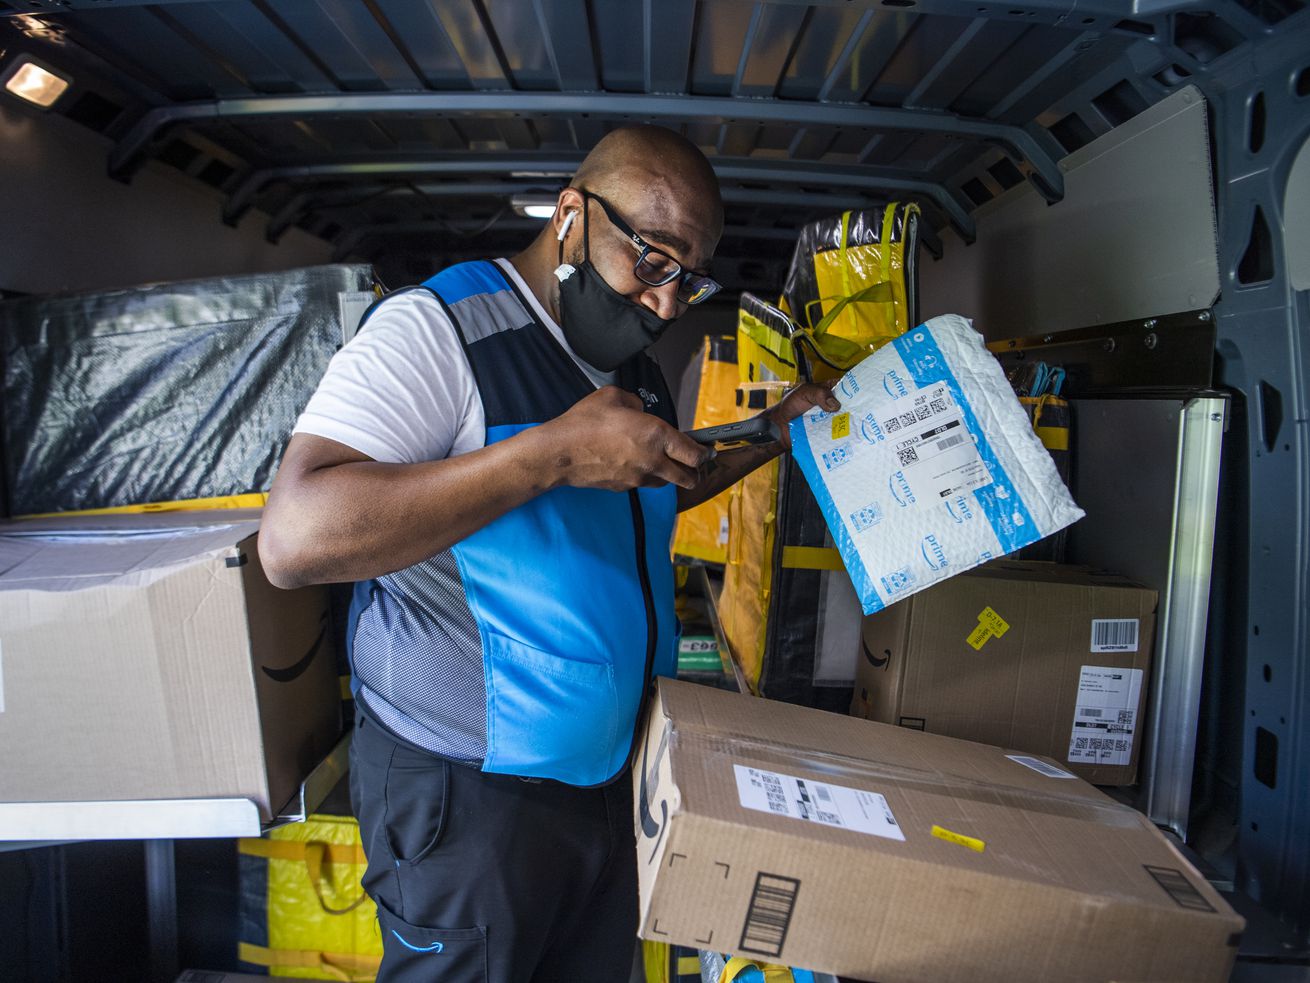 An Amazon delivery driver scans packages inside a van.